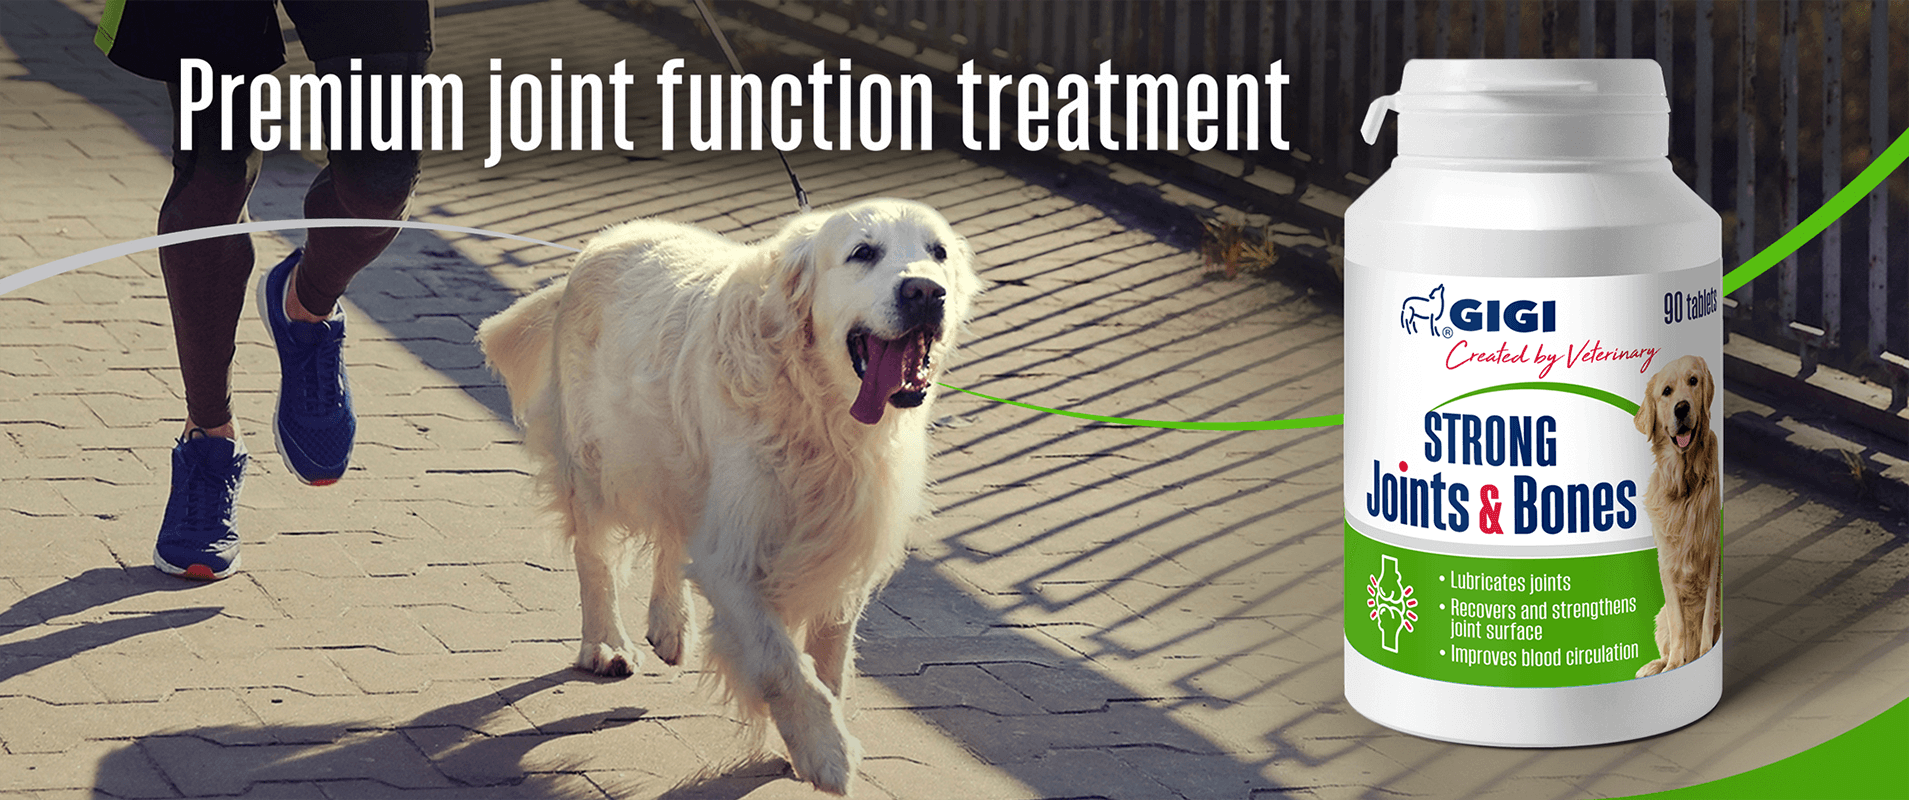 Premium joint and bone supplement for dogs